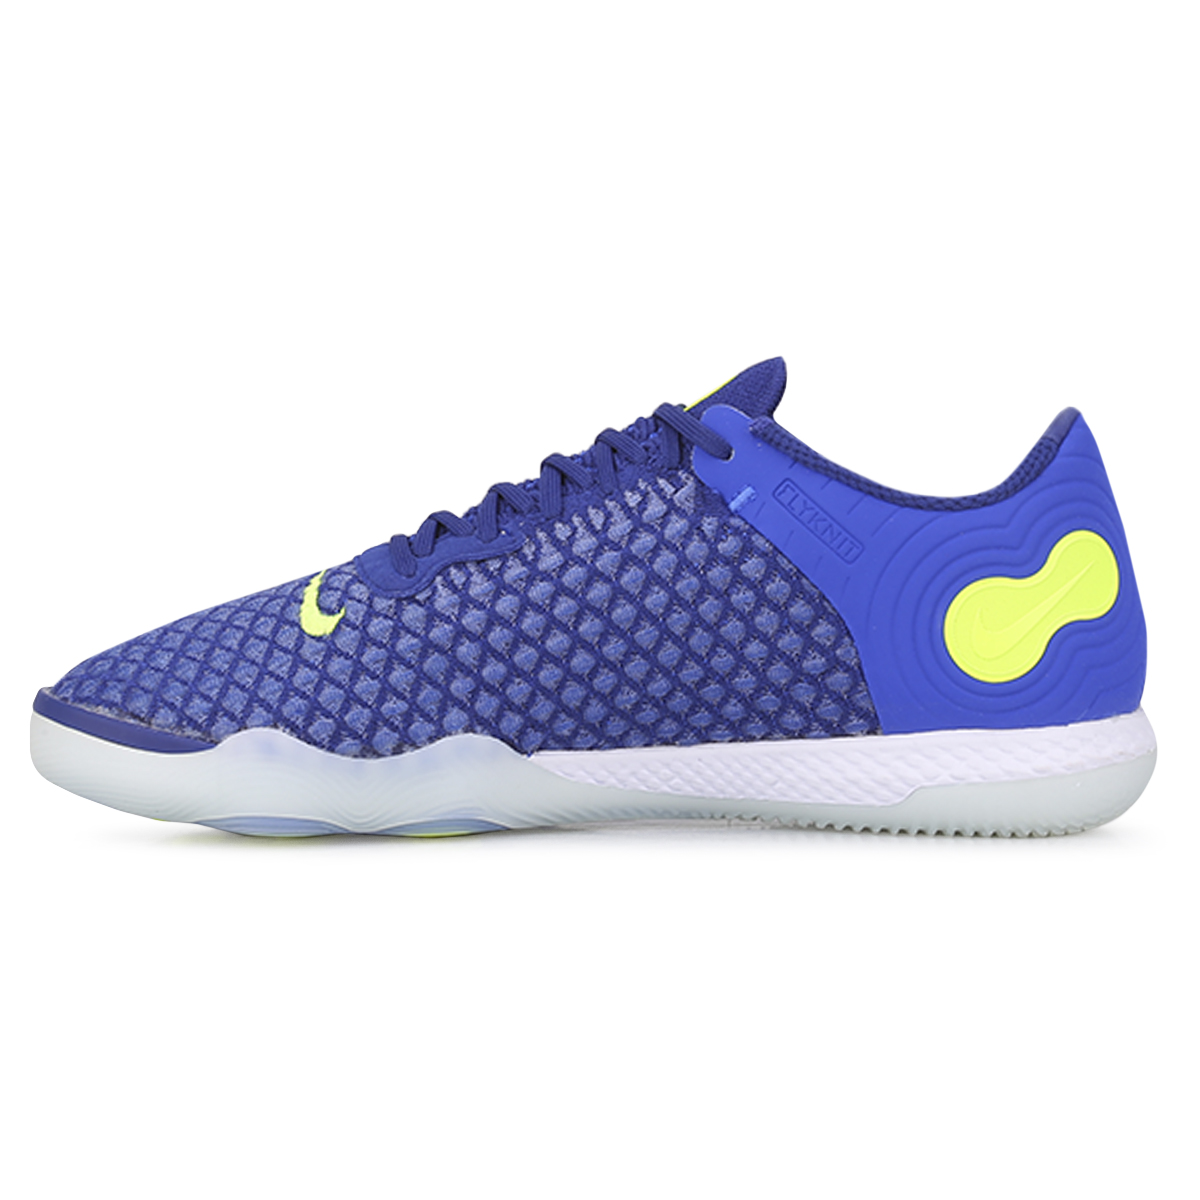 Botines Nike Small Sided React Gato,  image number null